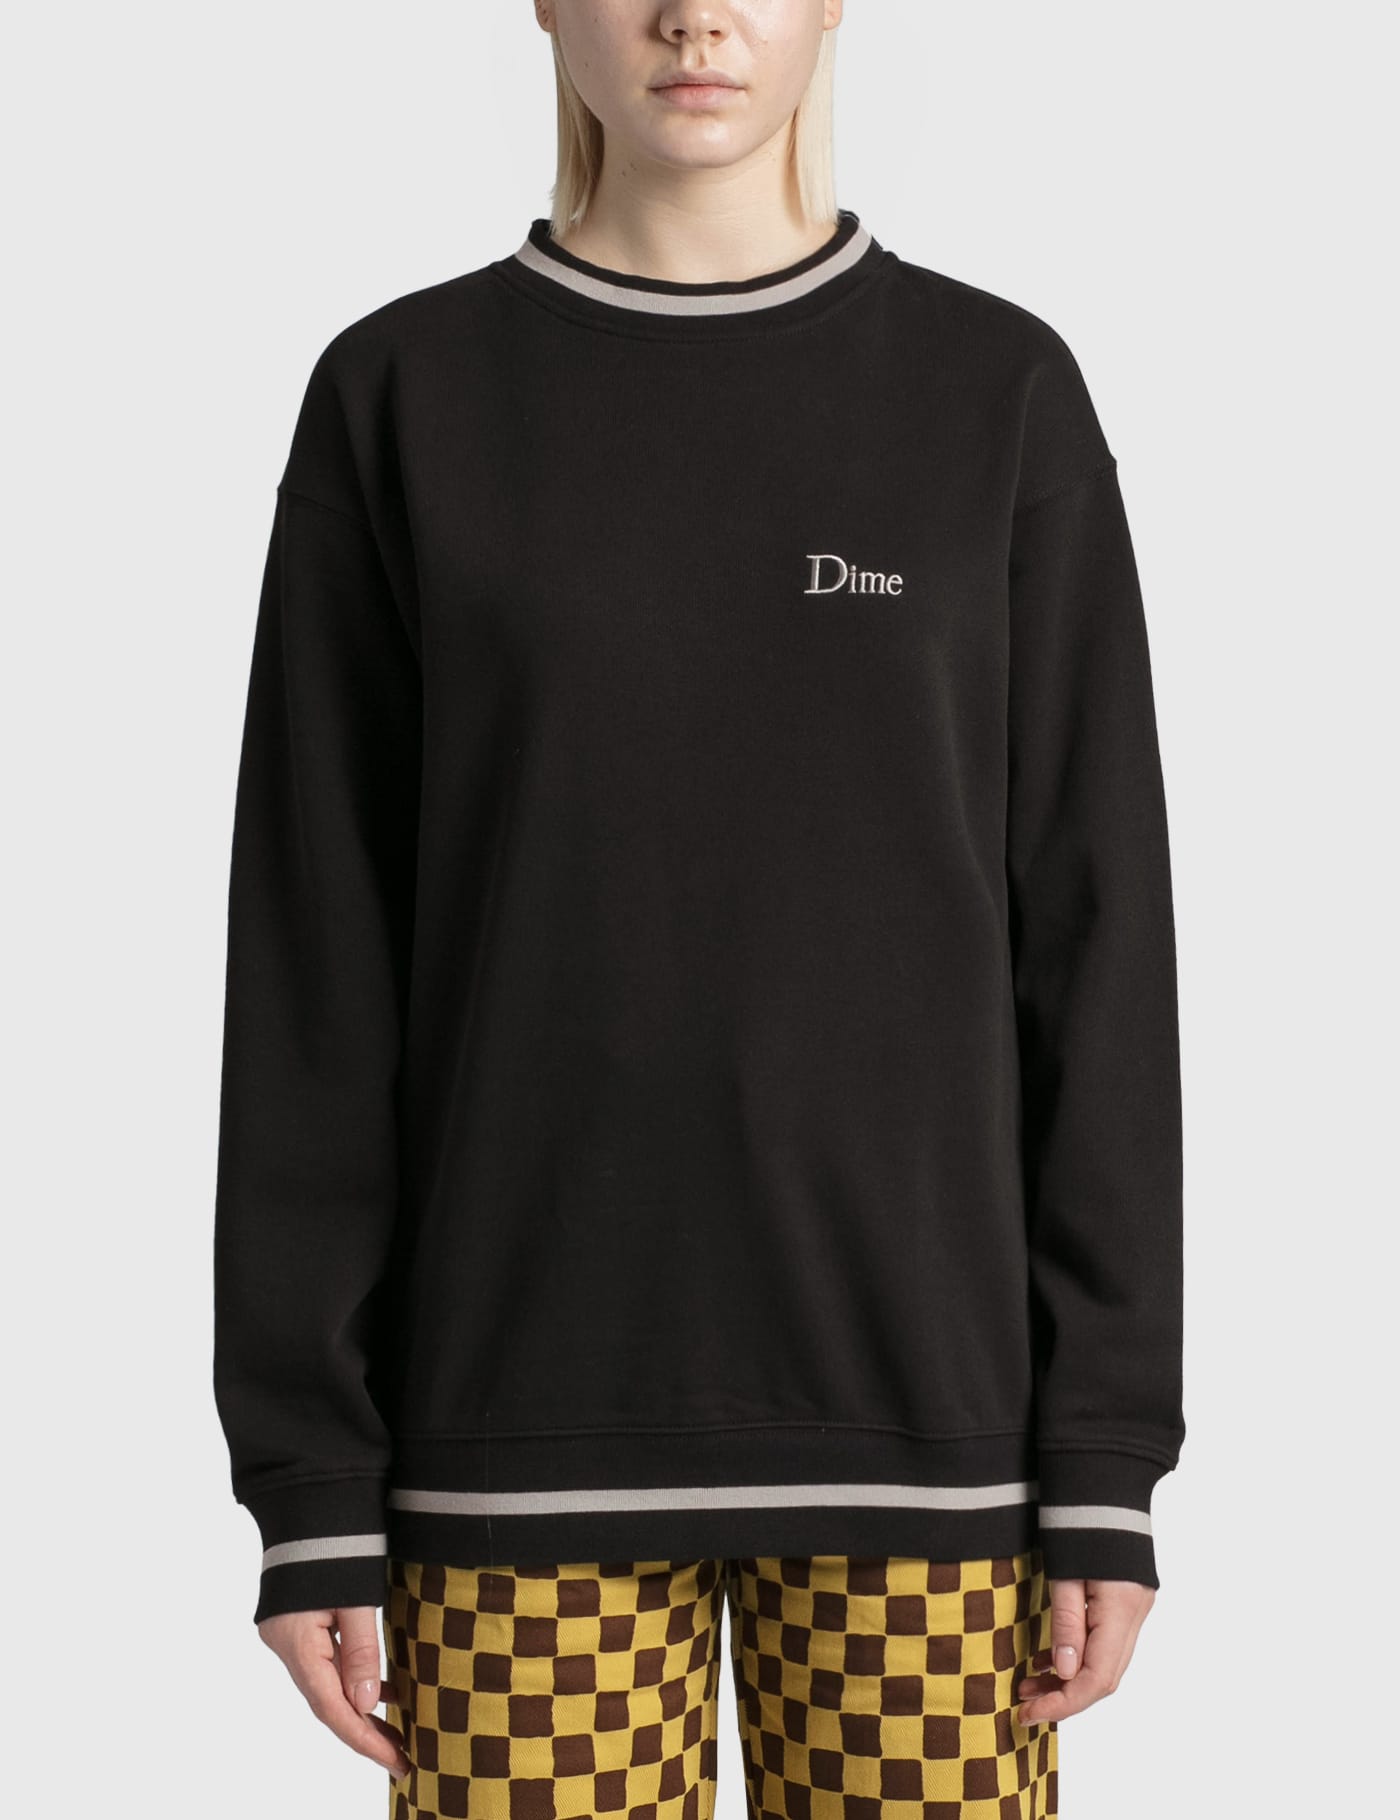 Dime - Classic French Terry Crewneck | HBX - Globally Curated